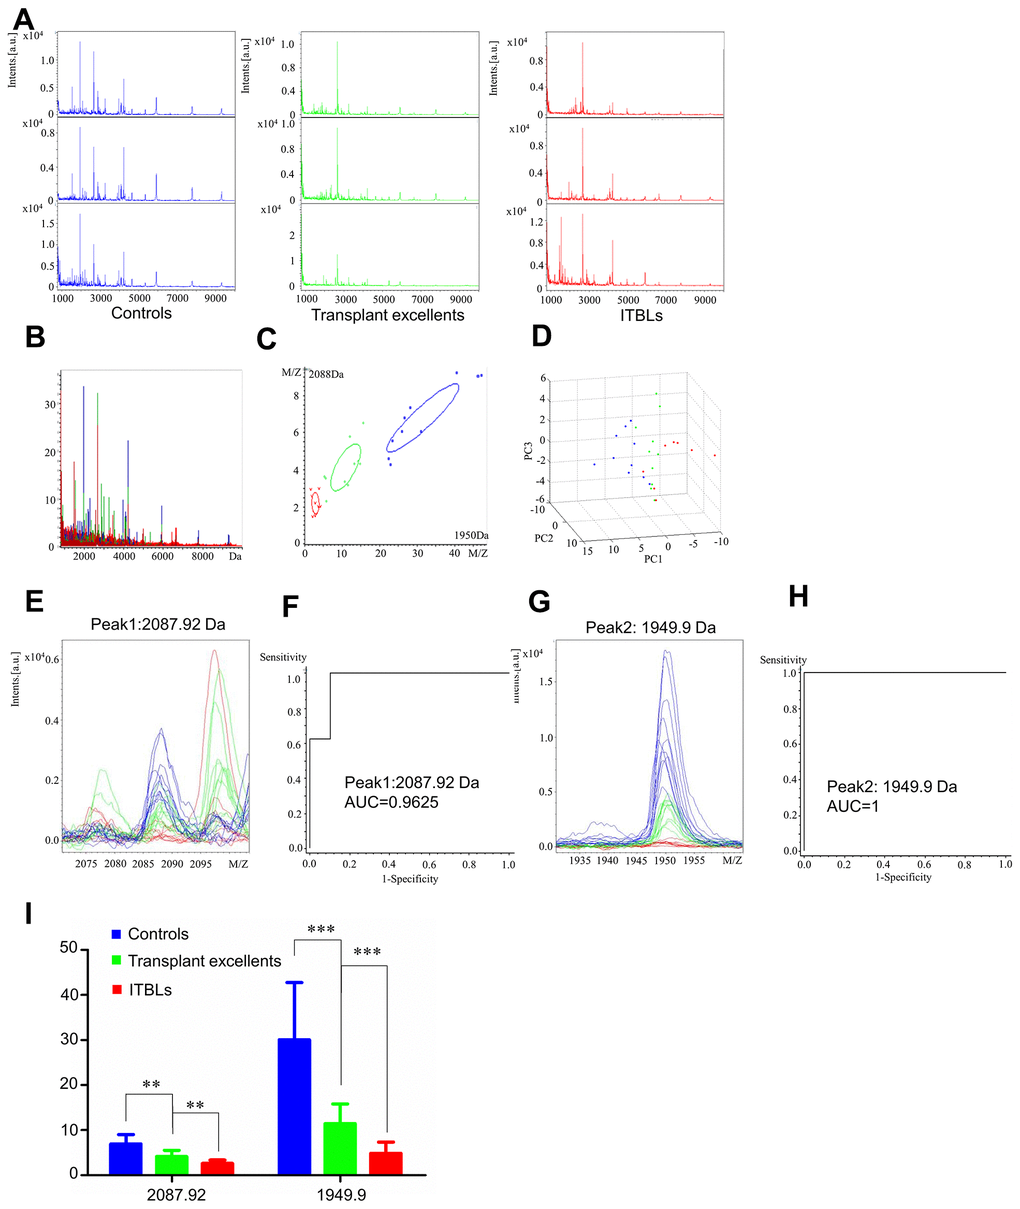 Serum proteomic profiling analysis for ITBL group, healthy controls (blue), transplant excellent patients (green) and ITBL patients (red). (A) Representative mass spectra of three samples in healthy controls, transplant excellent patients and ITBL patients in the mass range from 1000 to 10,000 Da. (B) Overall sum of the spectra in the mass range from 1000 to 10,000 Da obtained from ITBL group described above. (C) Bivariate plot of ITBL group with the most differentiated two peaks (m/z: 2088, 1950). (D) 3D plot of ITBL group. (E, G) Comparison of the spectra of two peaks in healthy controls, transplant excellent patients and ITBL patients. (F, H) ROC curves for two selected peaks with their AUC values. (I) Average expression levels of two selected peaks in healthy controls, transplant excellent patients and ITBL patients and their respective p-values. Values are expressed as mean ± SD. (***p p p 